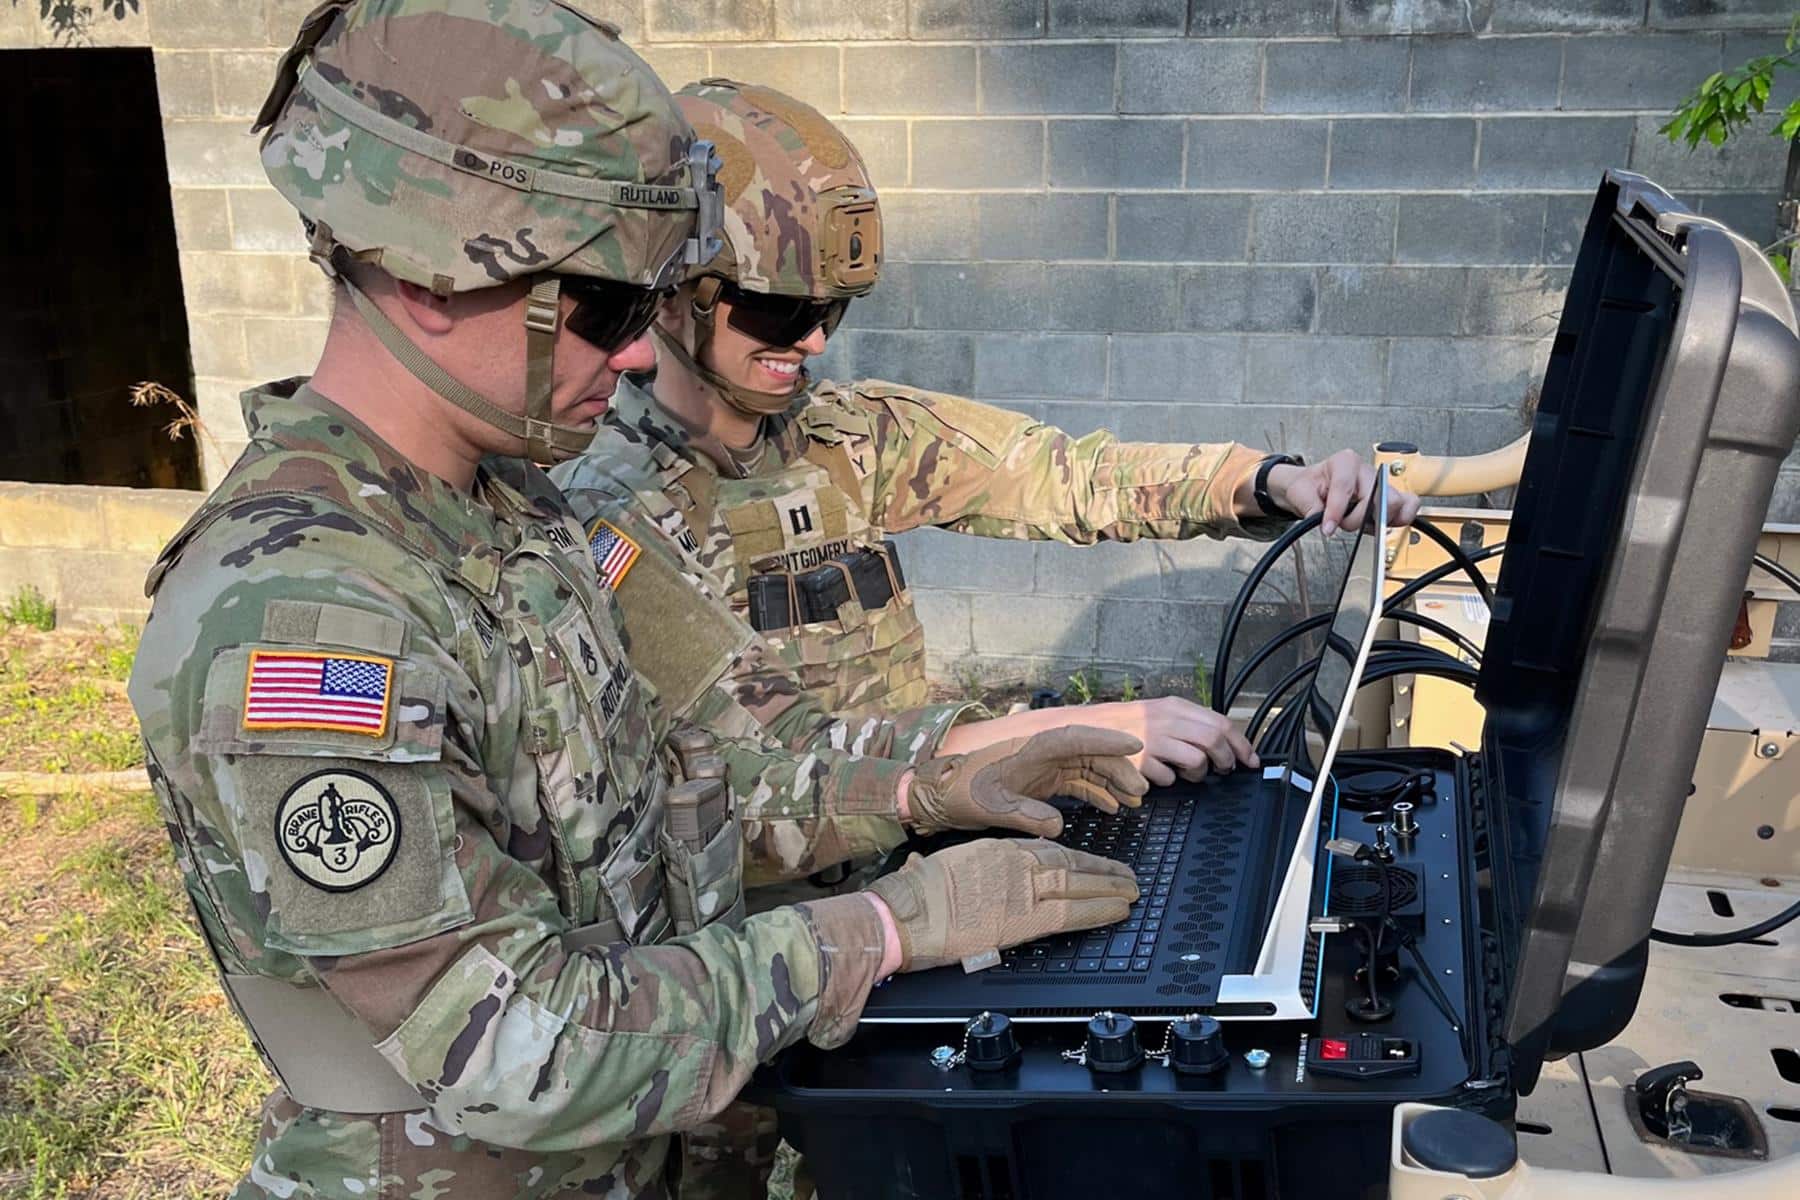 Staff Sgt. Jarrod Rutland and Capt. Paulina Montgomery, 1st Space Brigade, prepare the MRZR vehicle with the SEEKr, a newer small form factor prototype, to support and move tactically for the Ranger Regiment raid during the U.S. Army Special Operations Command’s Capabilities Exercise, April 23-27, at Fort Bragg, North Carolina. (U.S. Army photo)